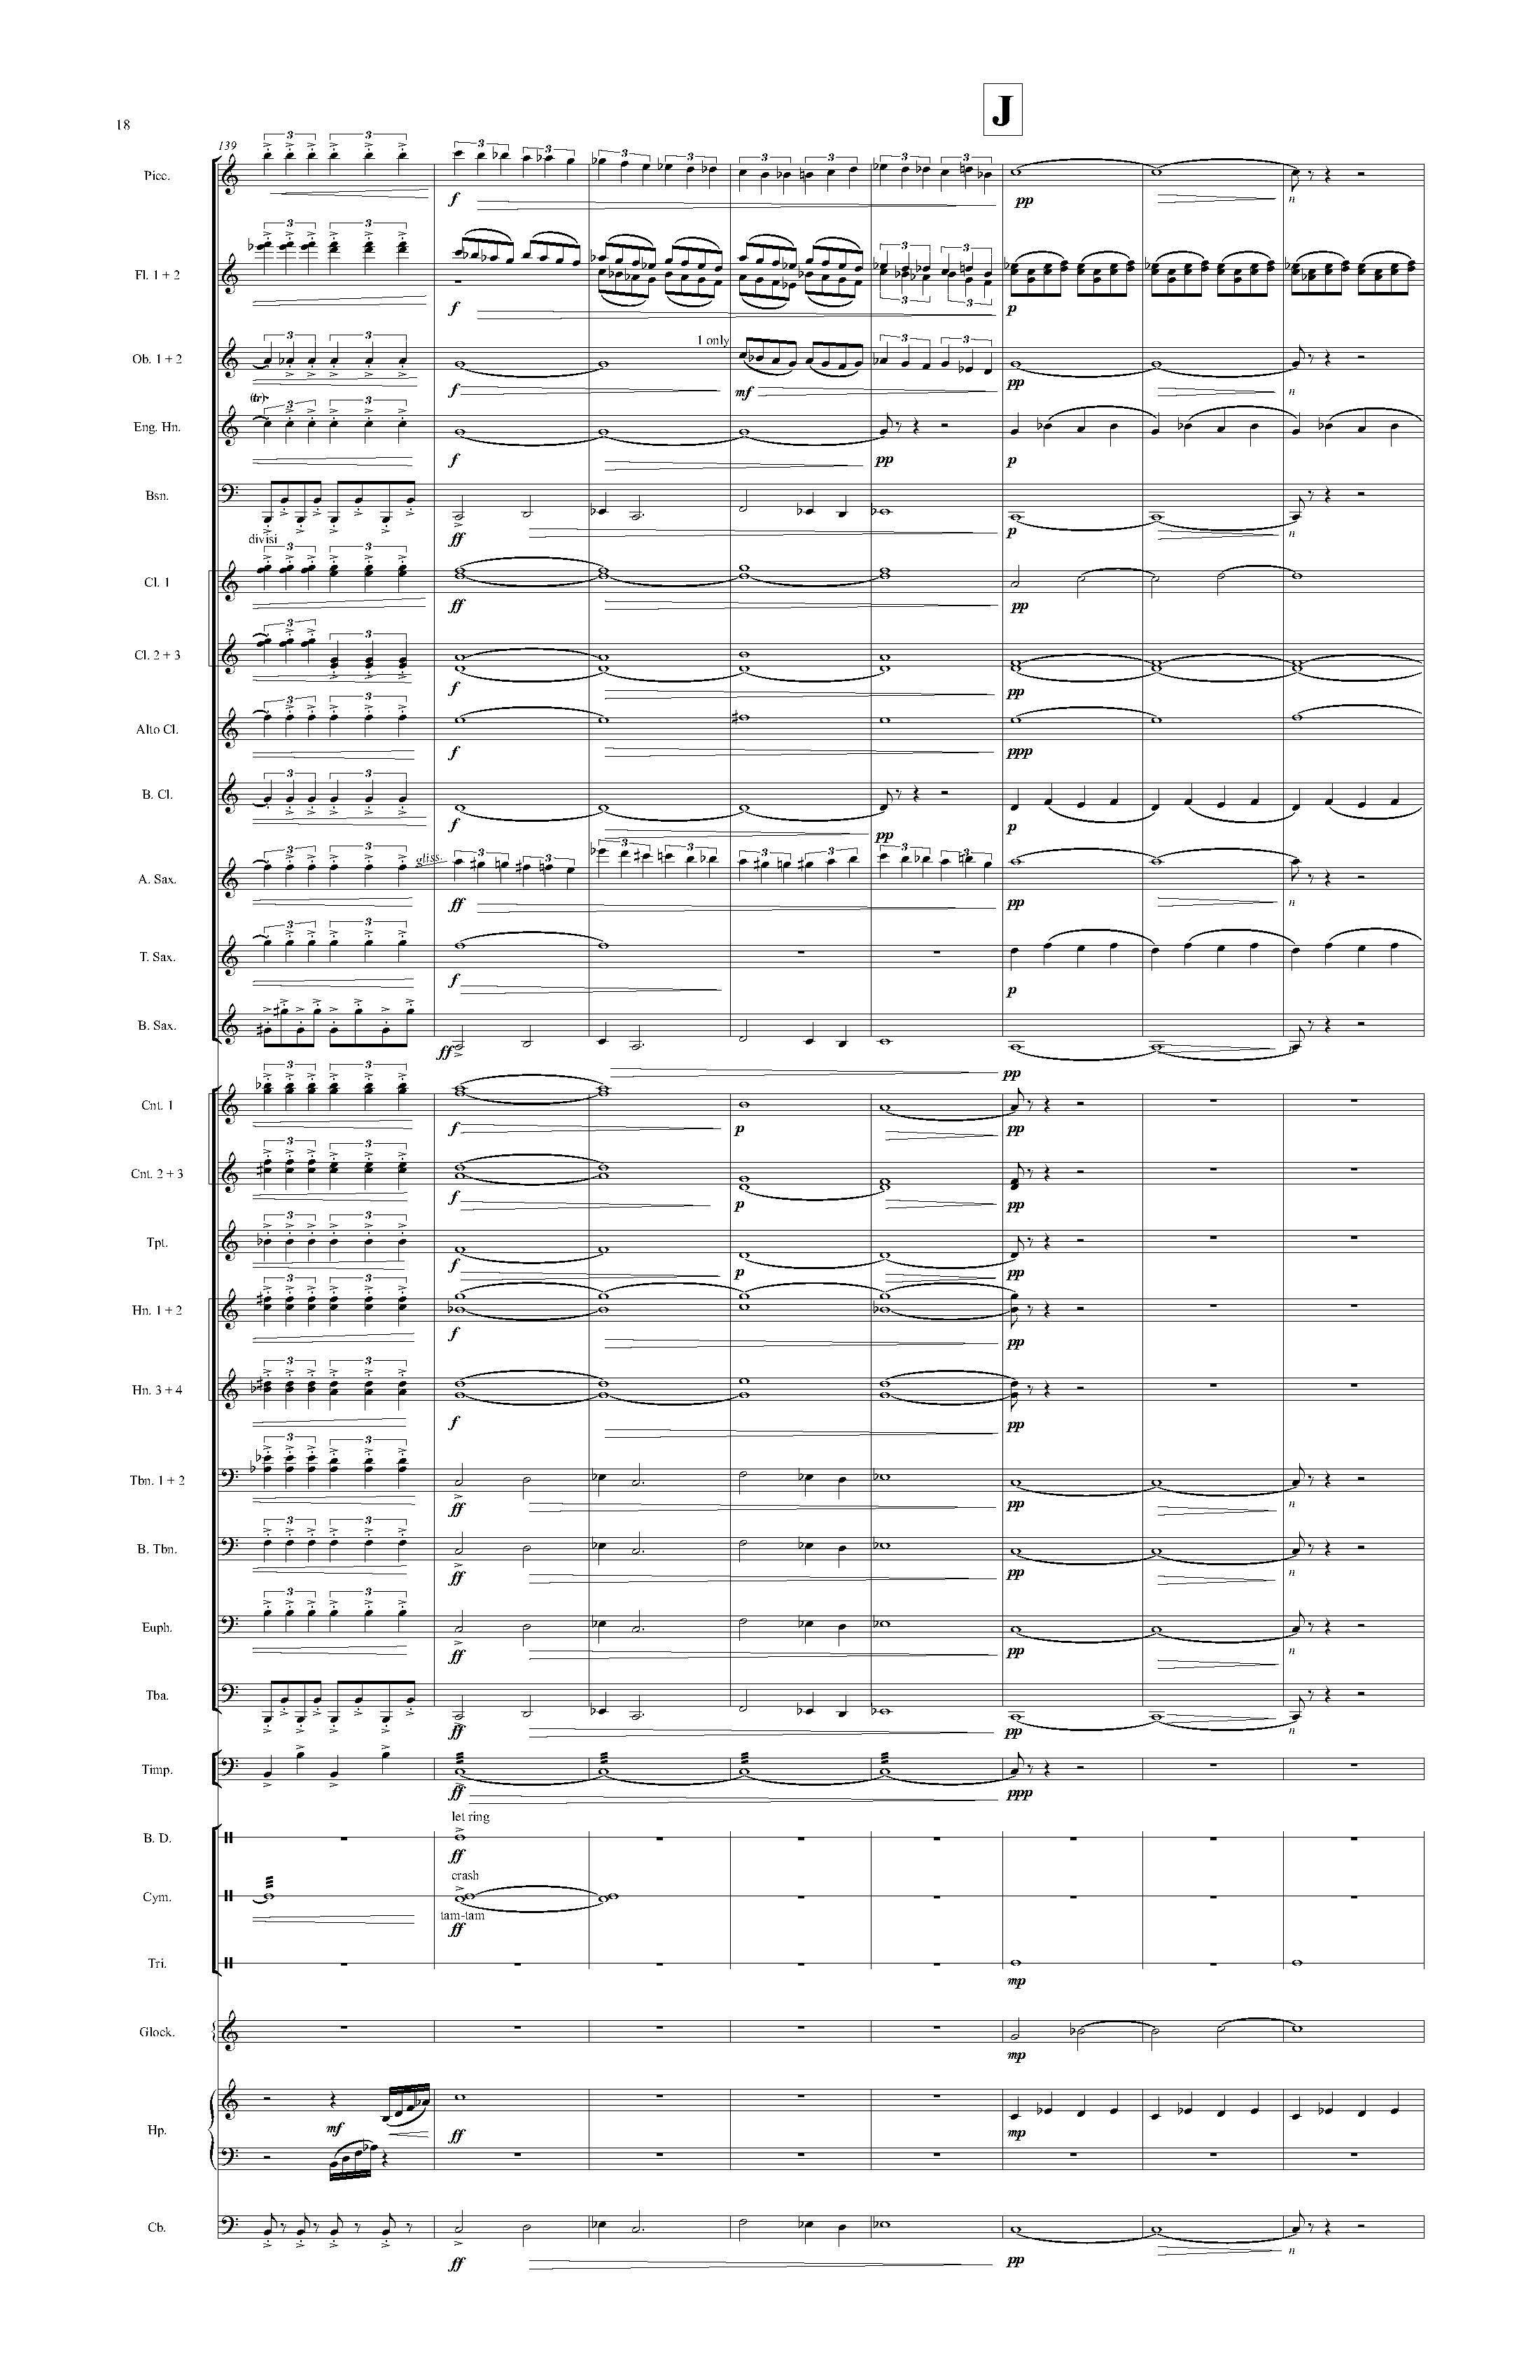 Psyche - Complete Score_Page_24.jpg